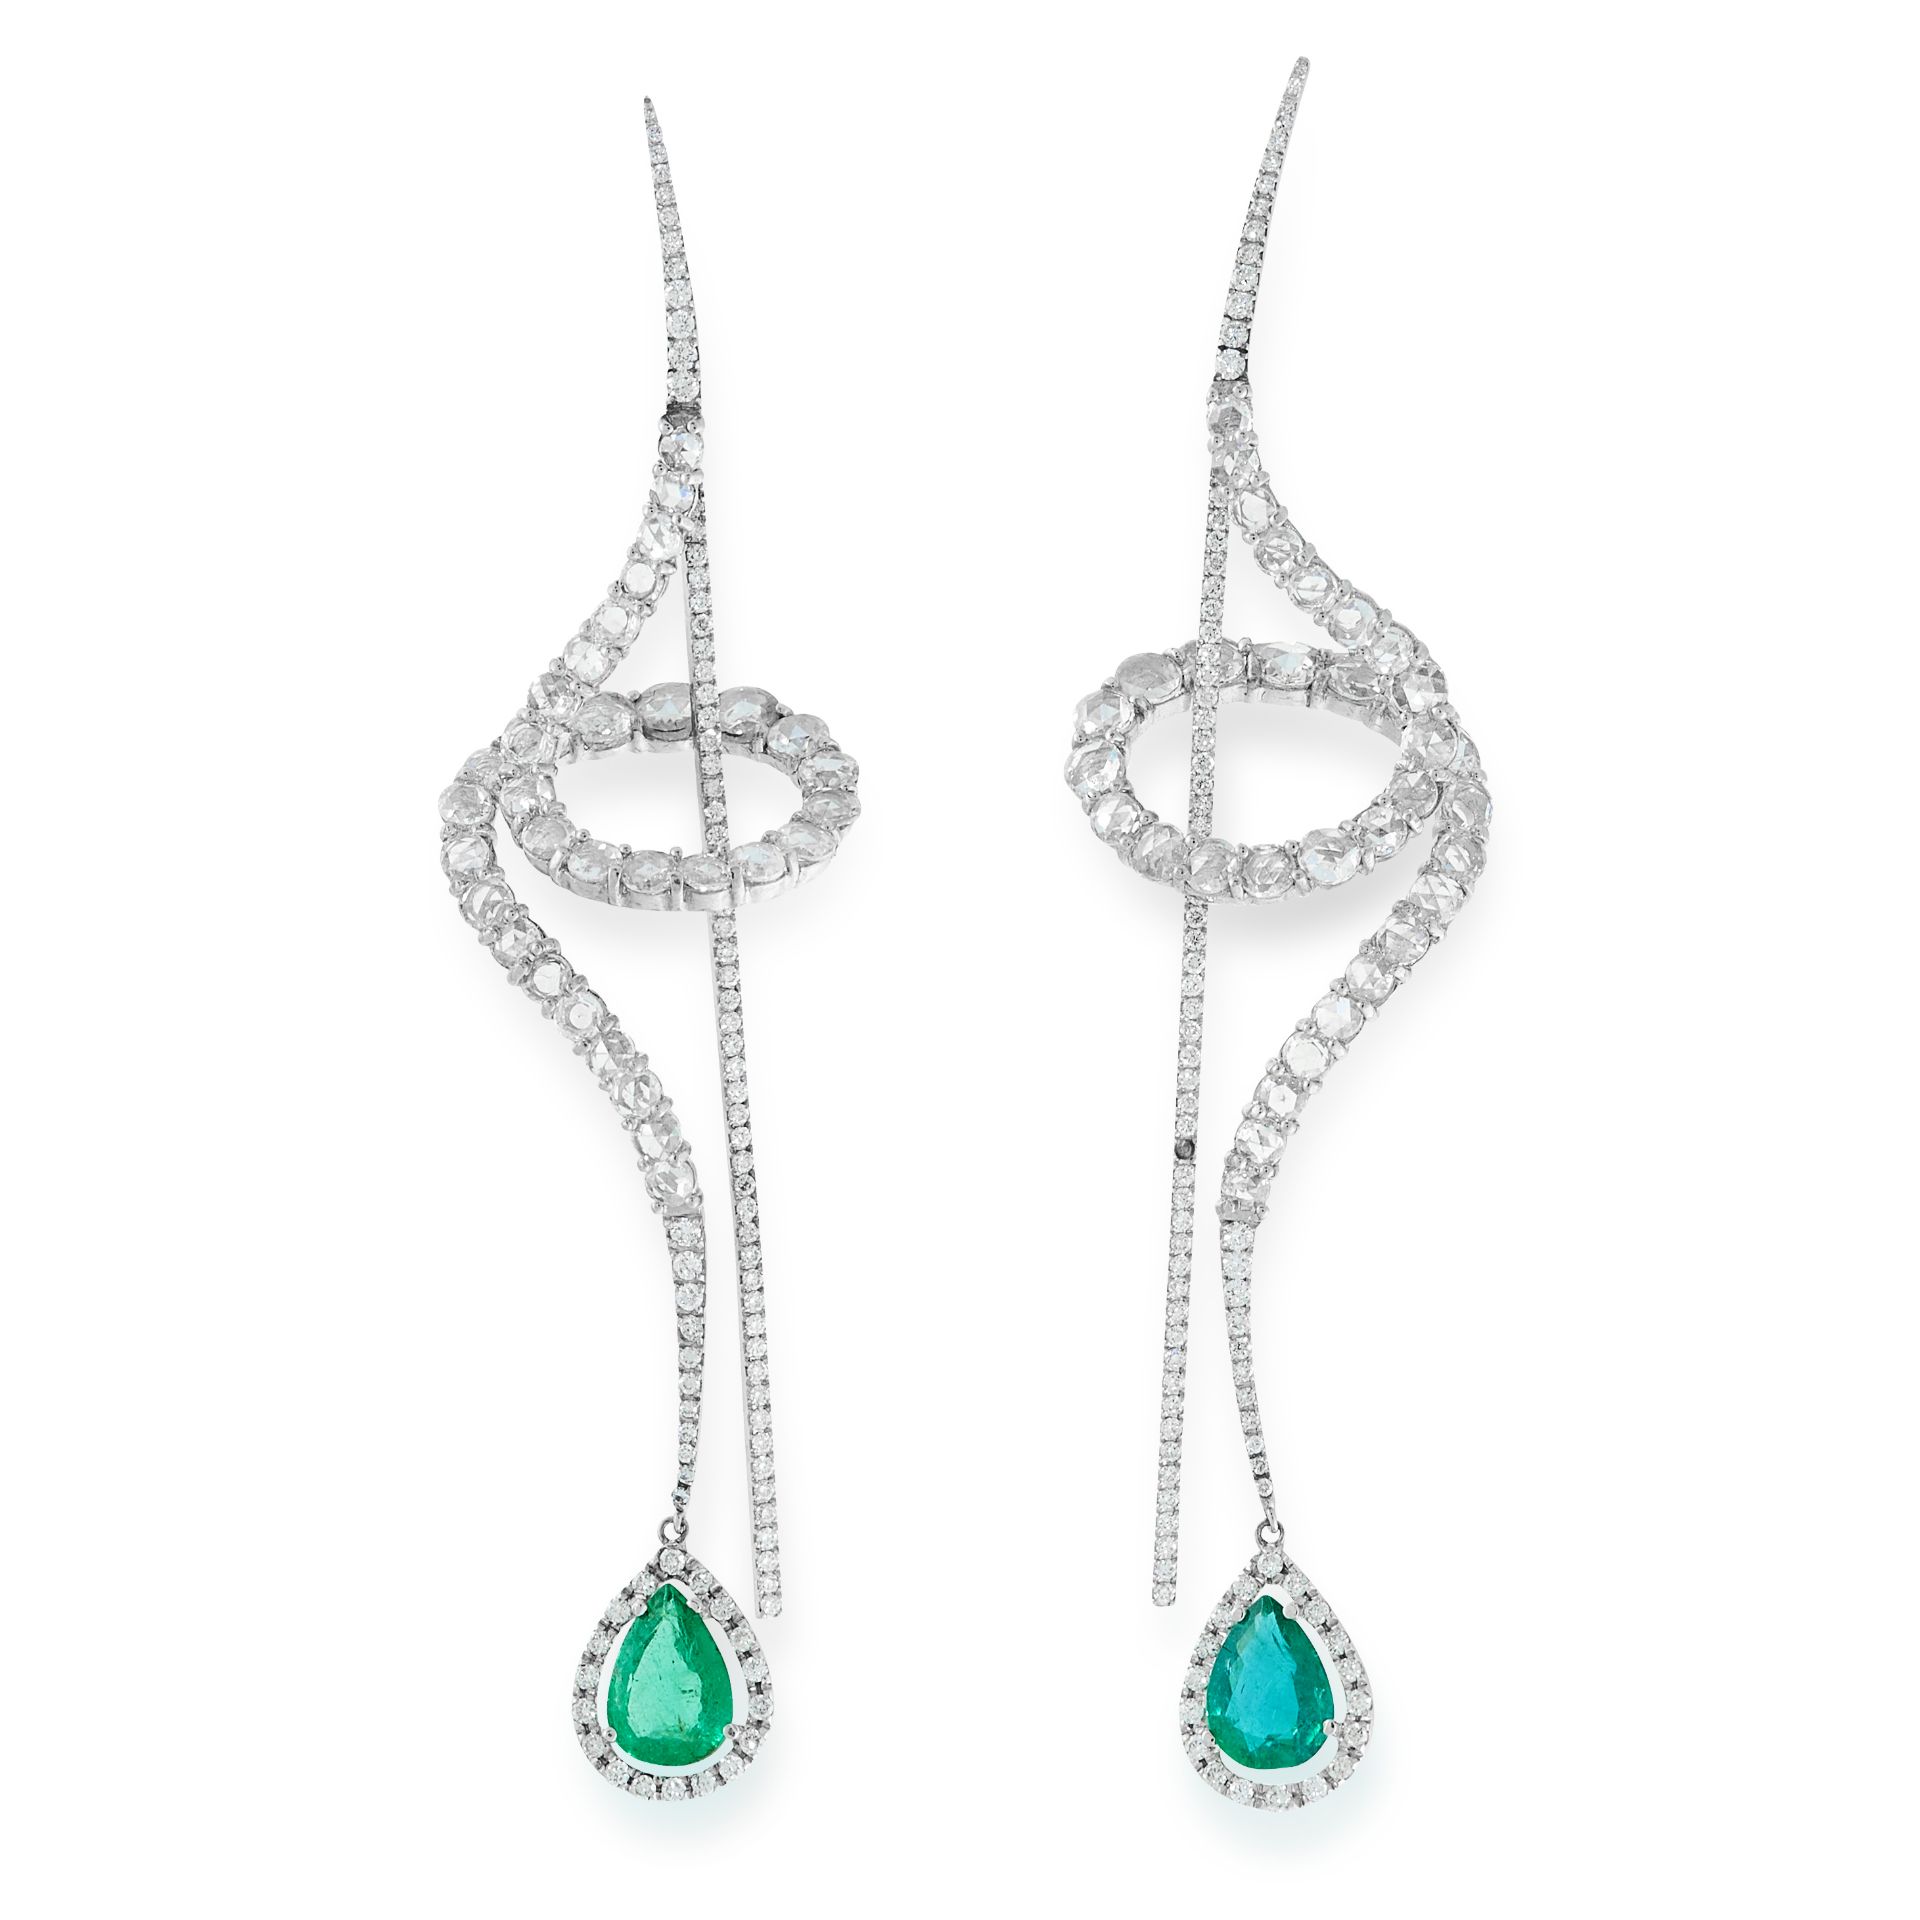 A PAIR OF DIAMOND AND EMERALD DROP EARRINGS in 18t white gold, in swirling design, comprising of a